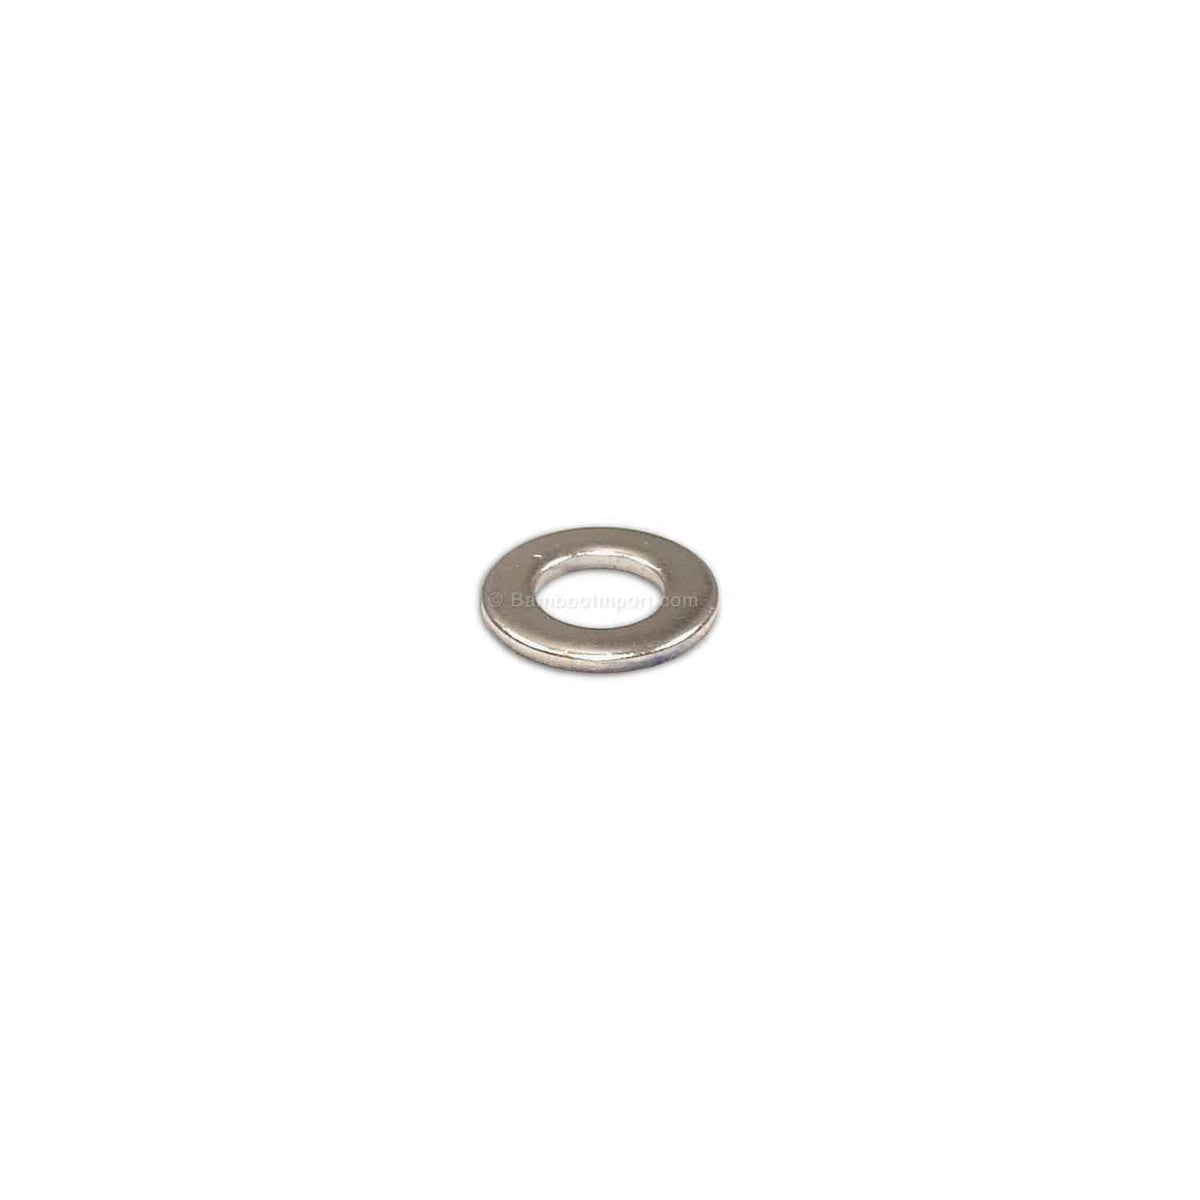 Stainless steel washer M8